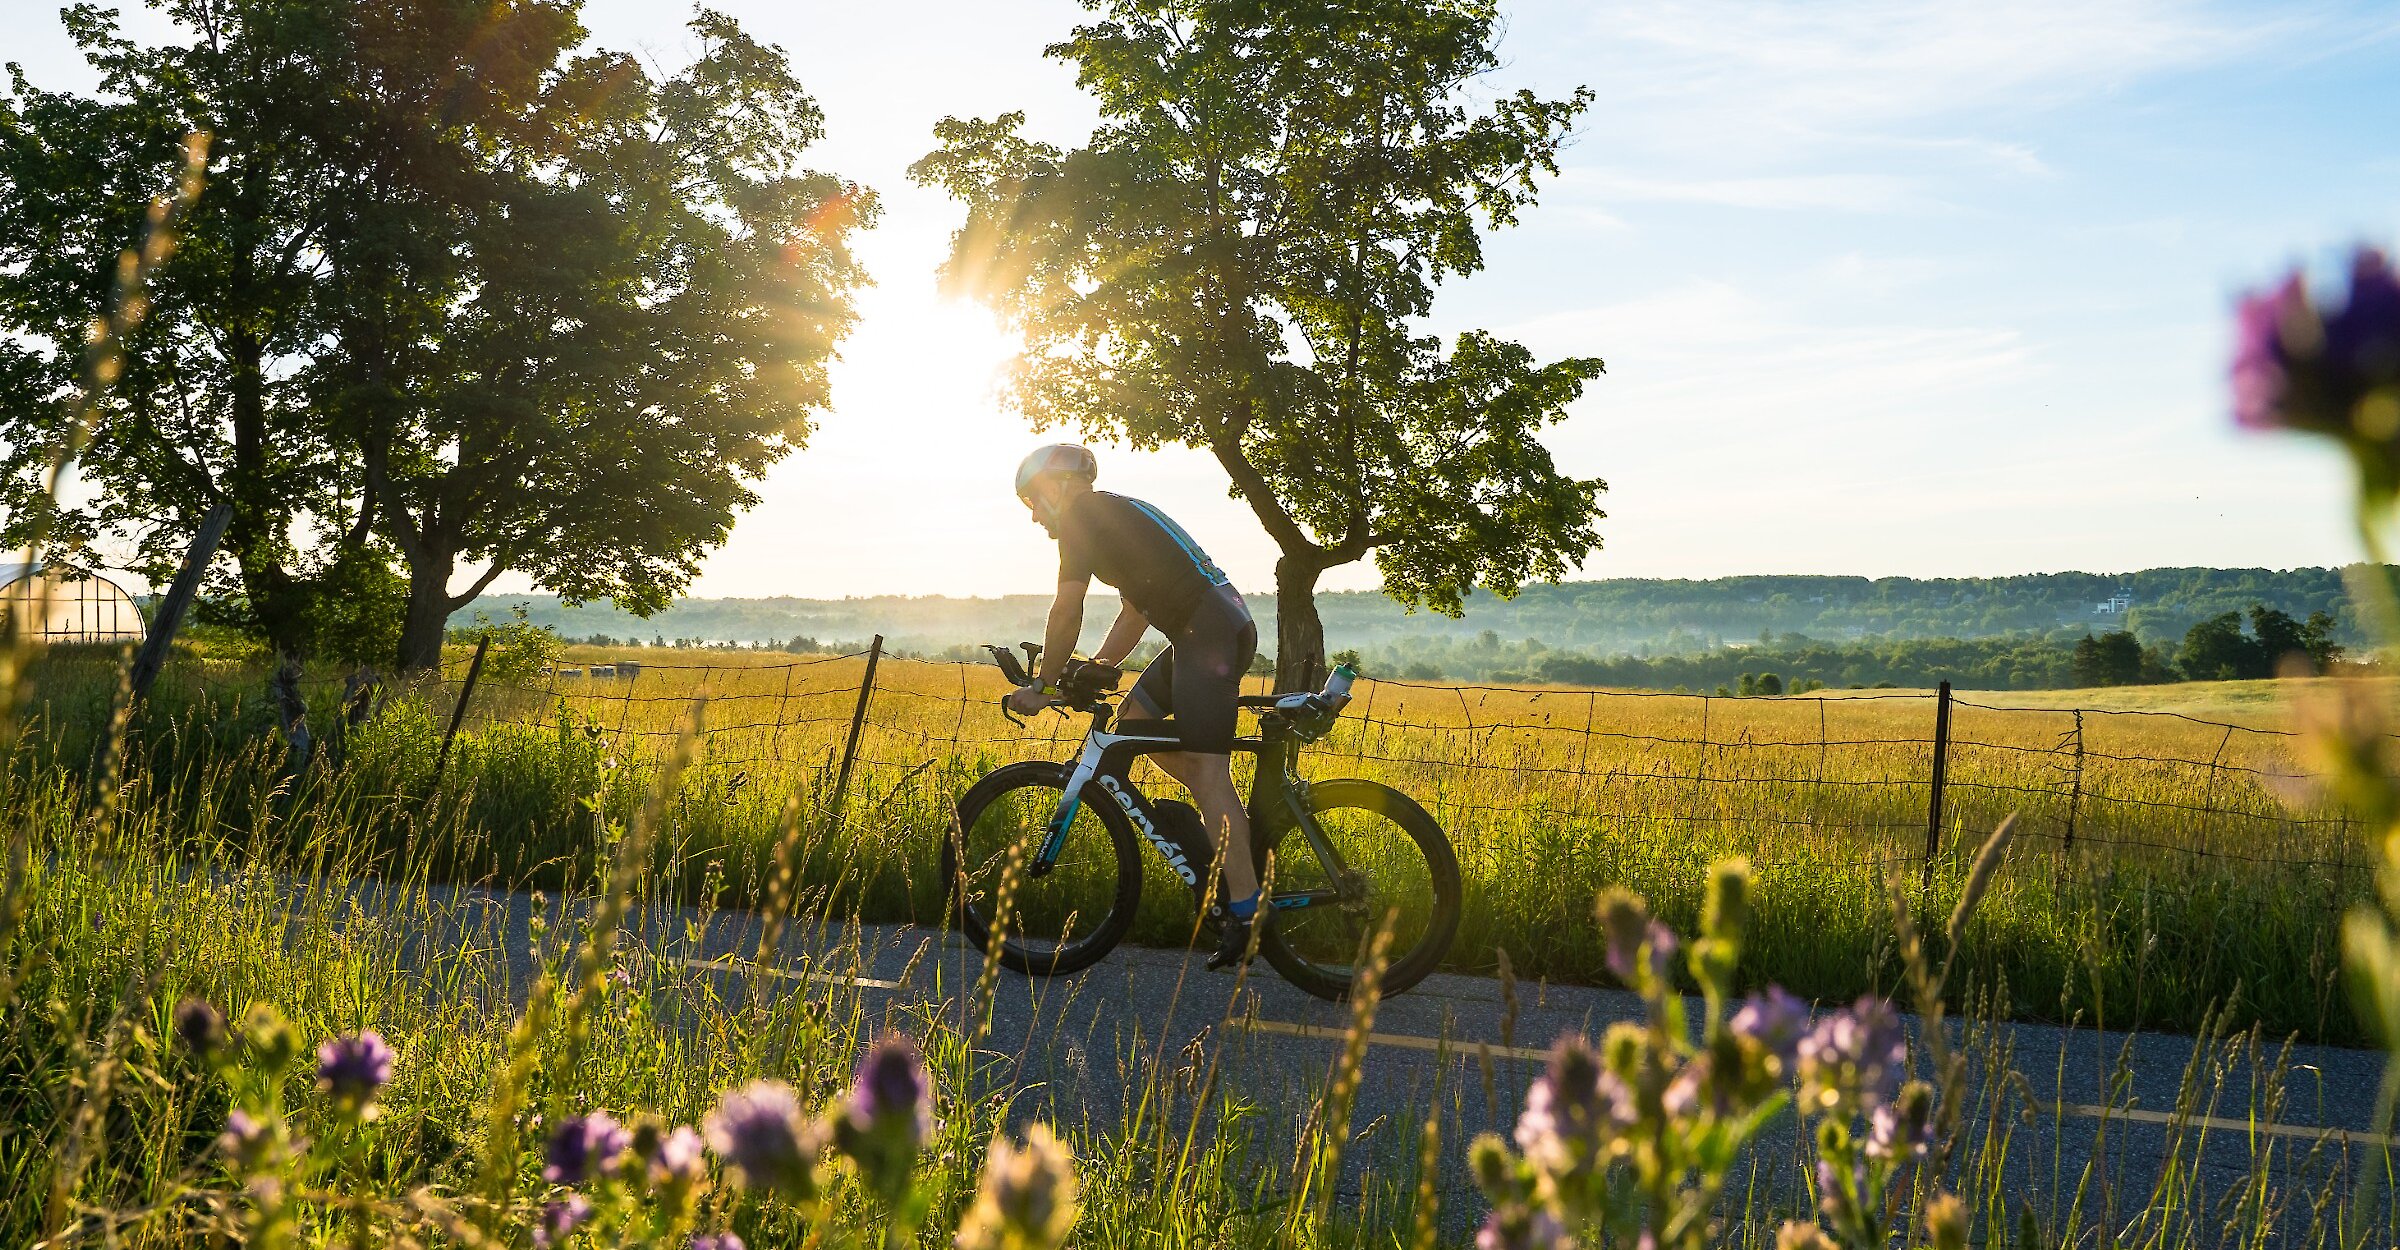 A cyclist in the Eastern Townships countryside